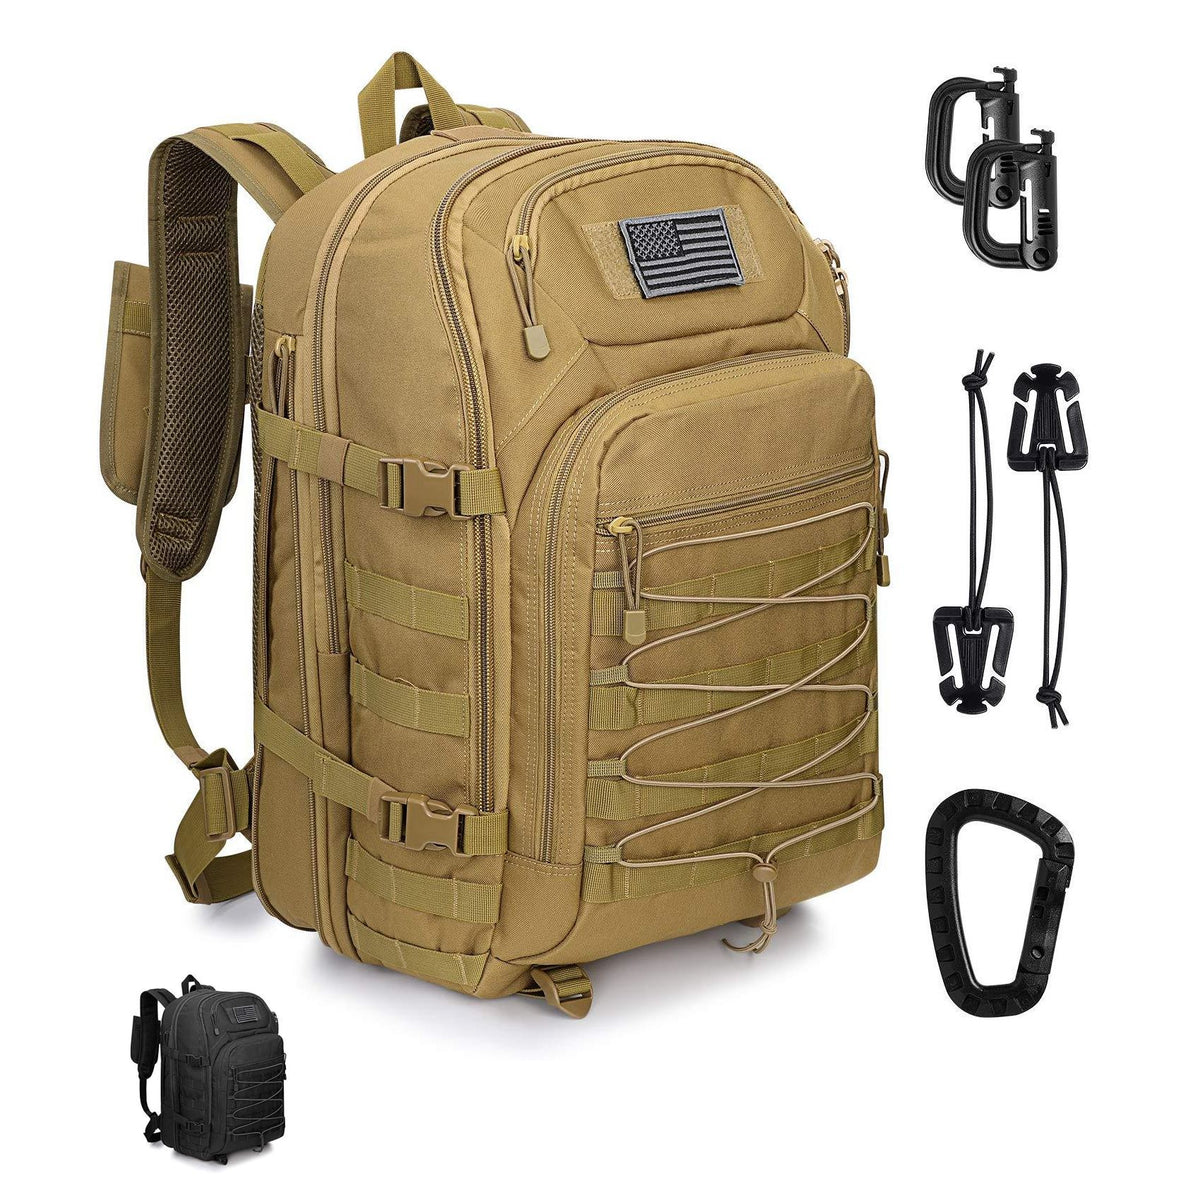 GreenTribes Military Tactical Backpack for Men - Large Tactical Backpacks 3 Day Assault Pack 40L Molle Backpack Waterproof for Hunting Hiking